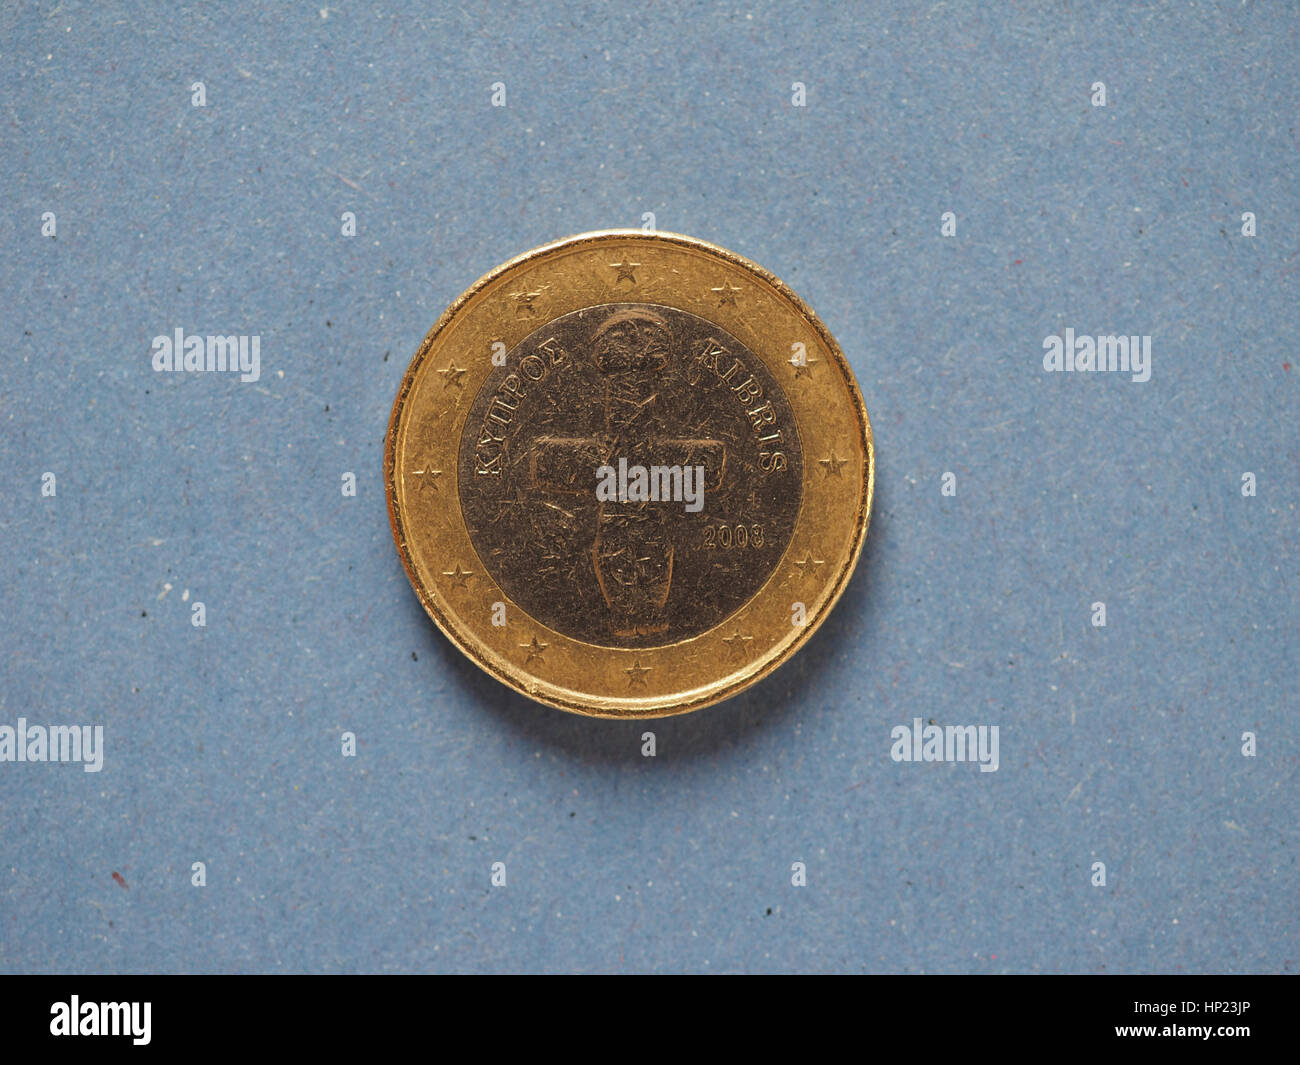 1 euro coin money (EUR), currency of European Union, Cyprus over blue background Stock Photo